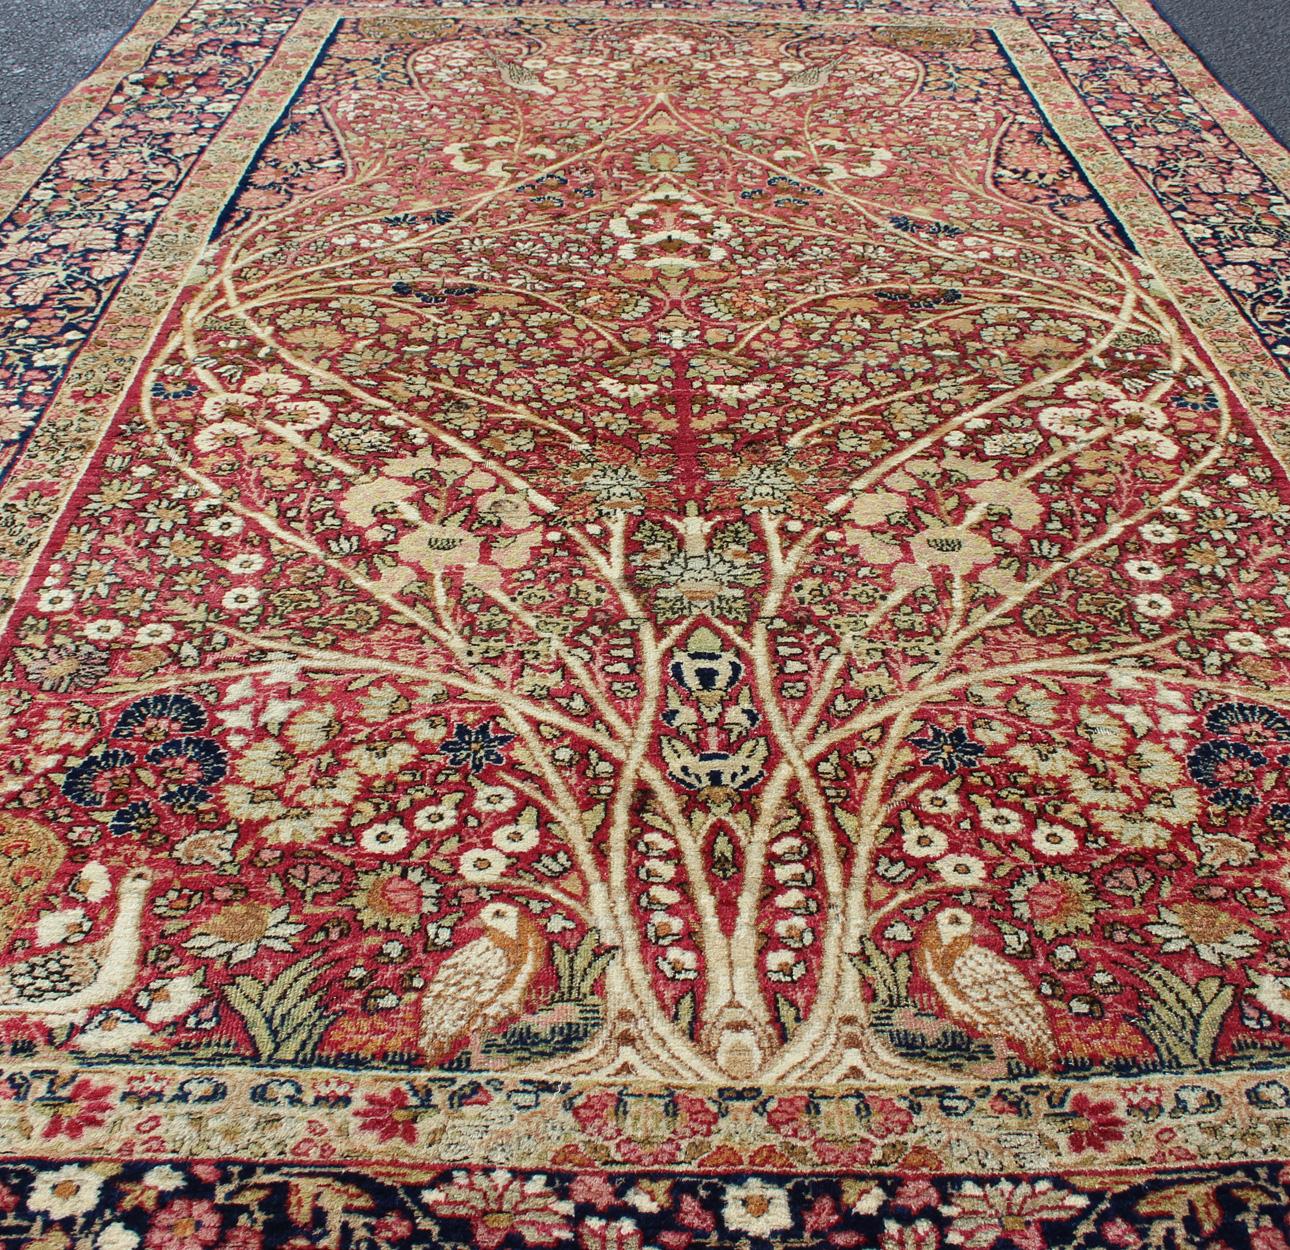 Very Fine Antique Persian Lavar Kerman Rug with Intricate Floral Design  For Sale 1